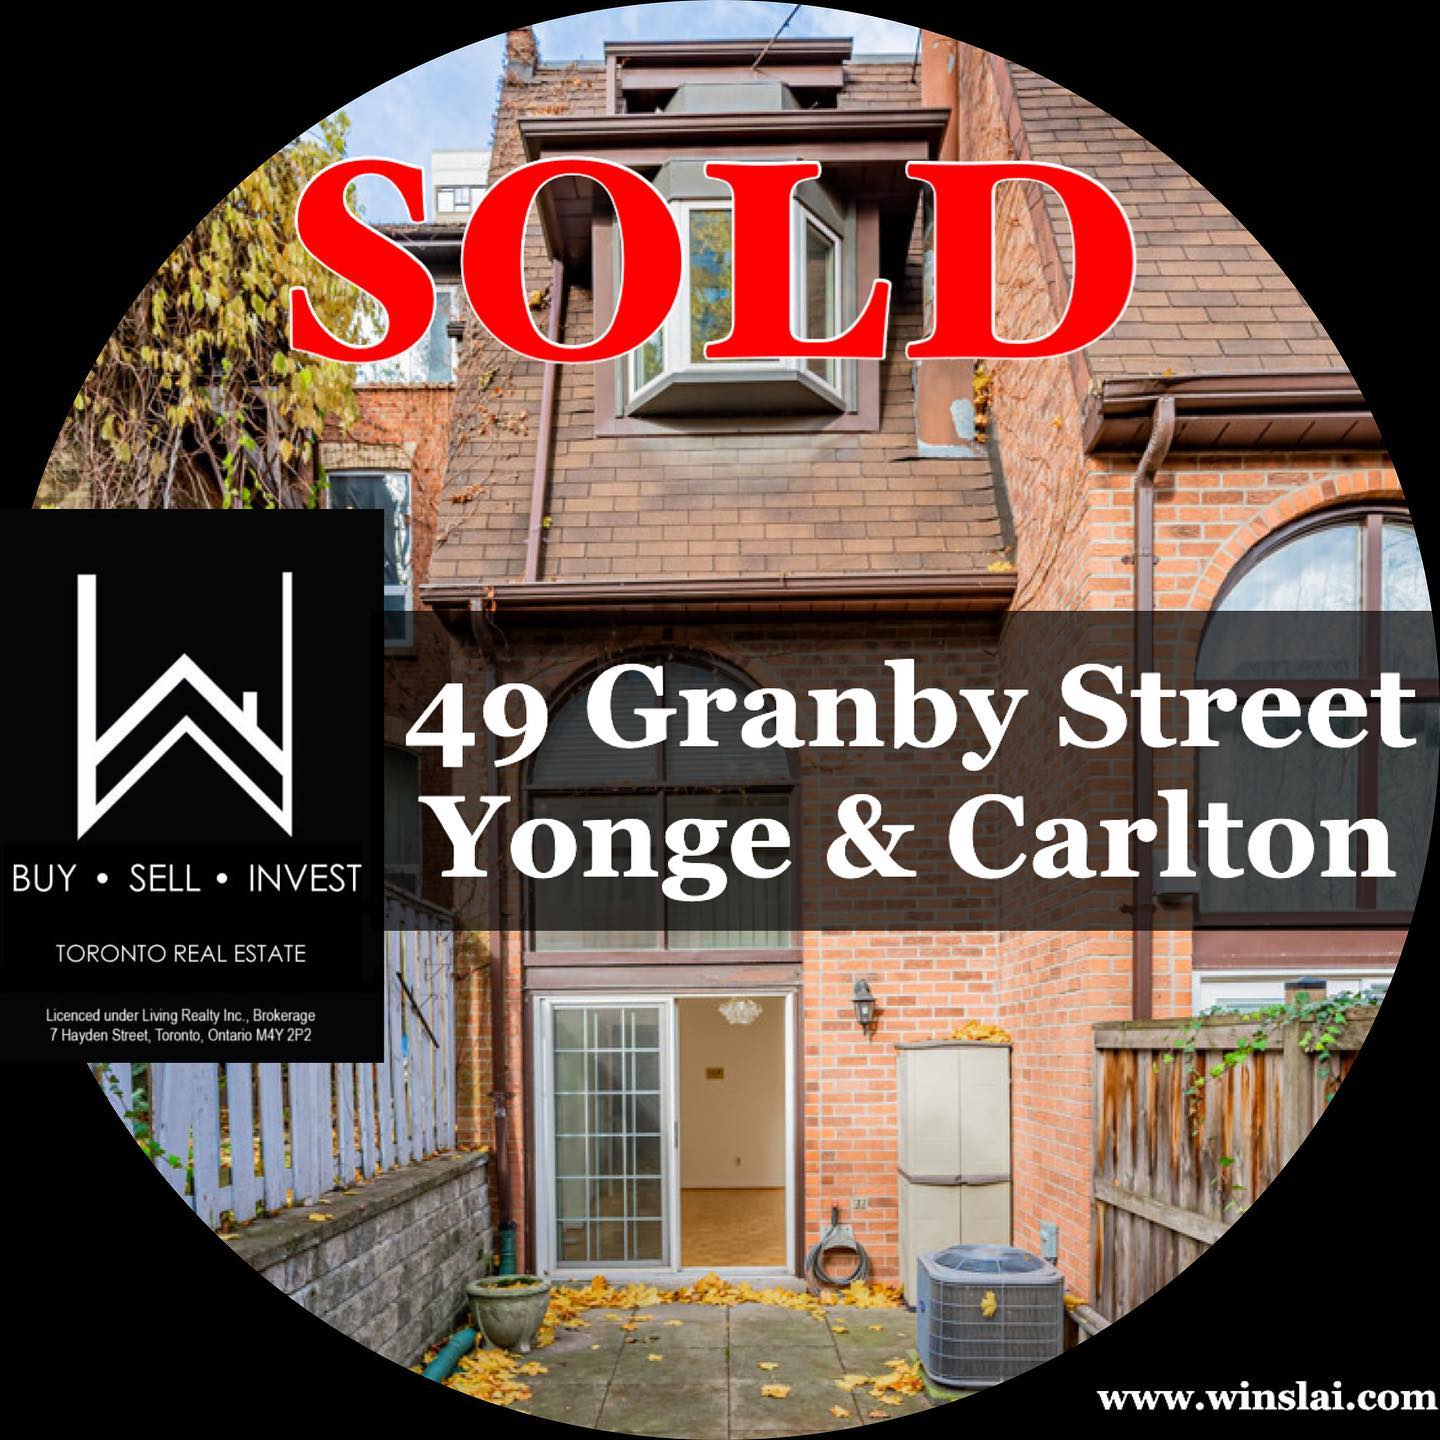 Sold flyer for 49 granby st